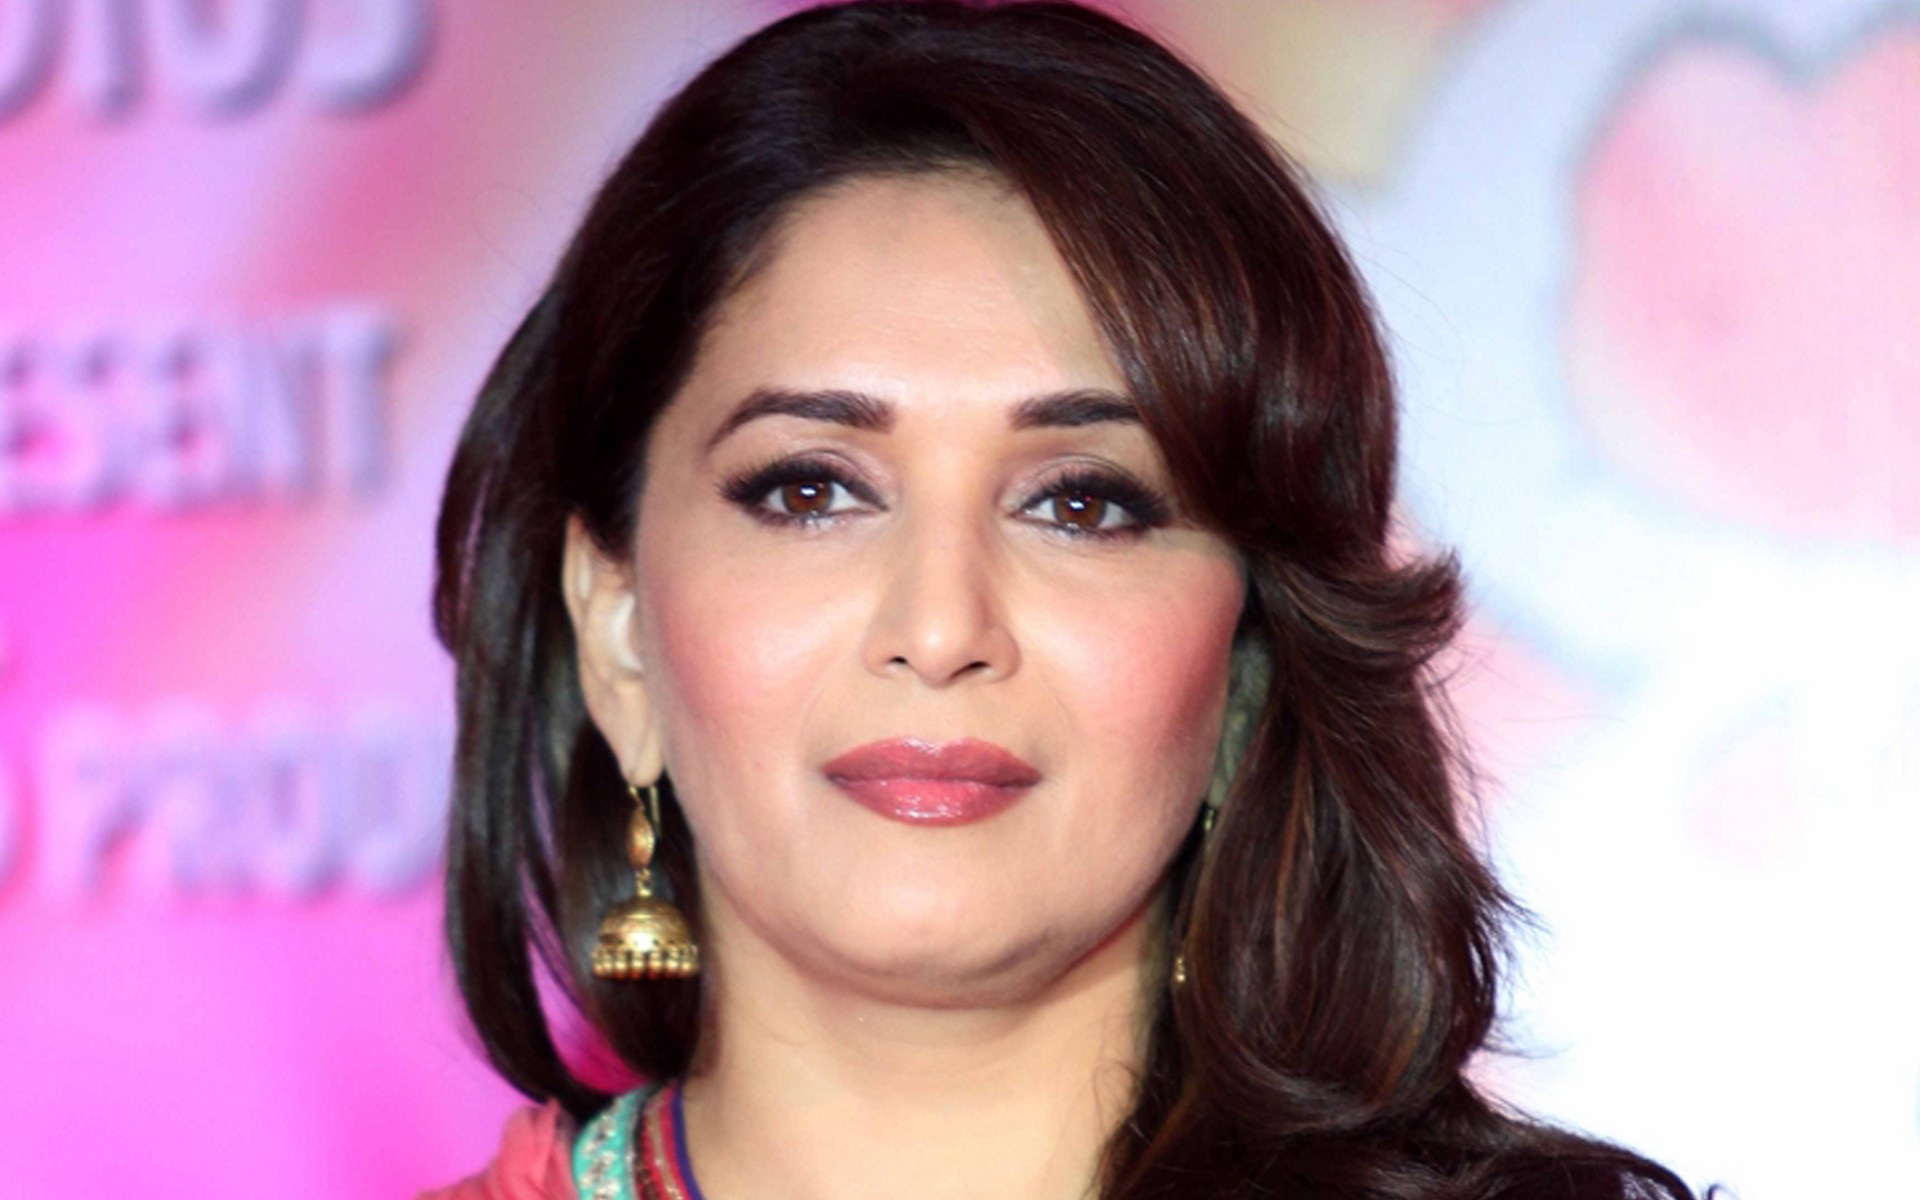 Madhuri Dixit have been accused of tax evasion